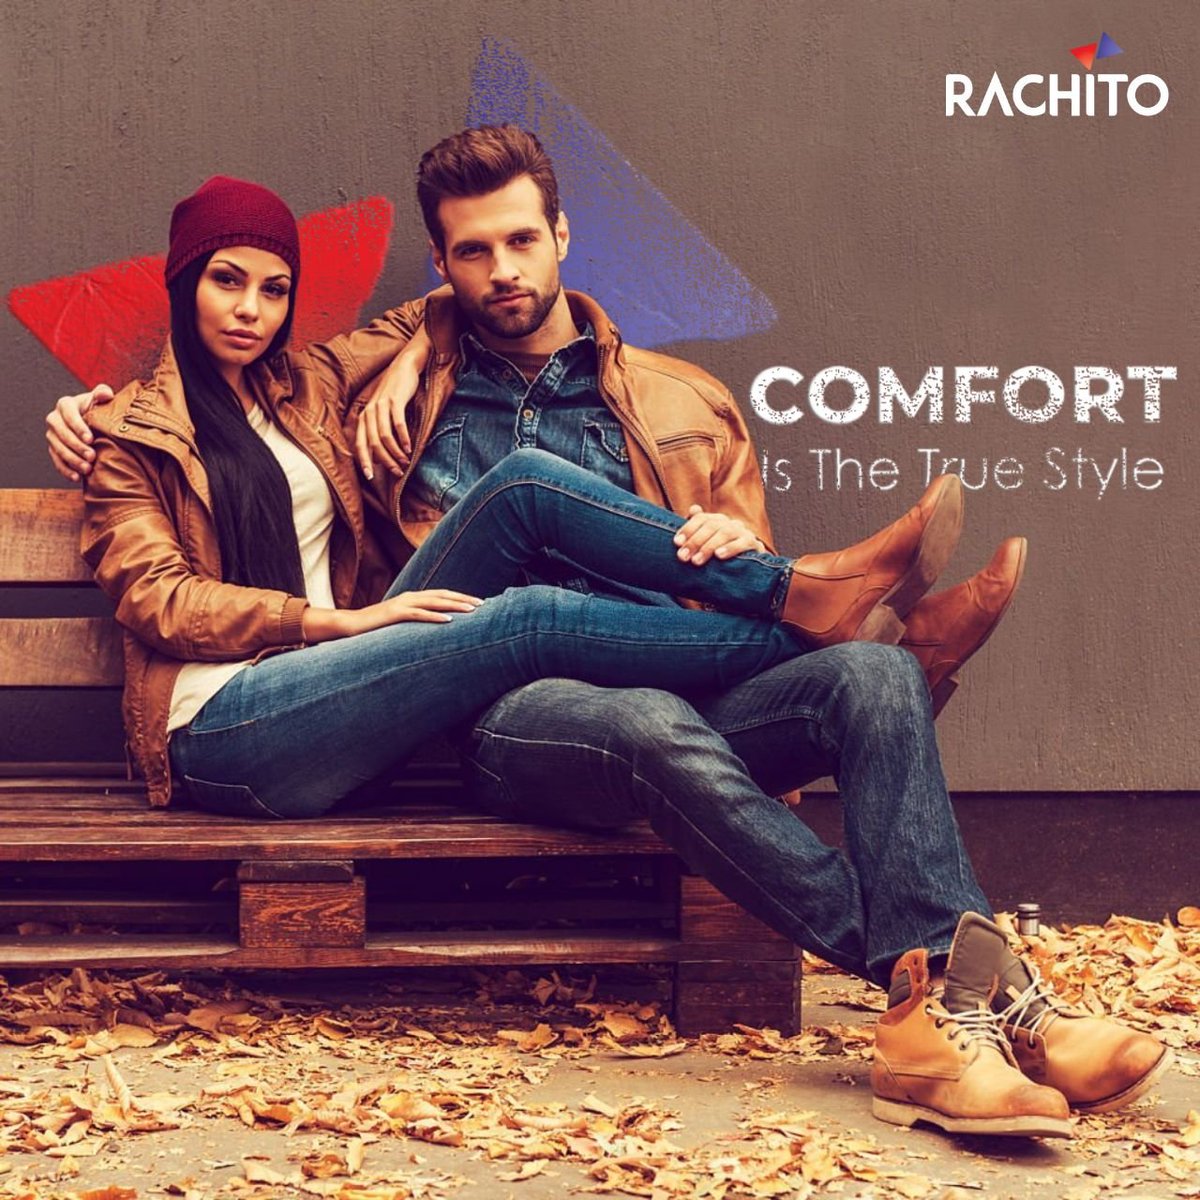 A clothing that is comfortable becomes your best friend and here at Rachito we prioritise comfort before all else.
--->
Coming Soon to You!
--->
#launchingsoon #rachito #comingsoon #instafashion #youthfashiontrend #menfashionstyle #classyfashion #fashiontrends #youthfashion2023